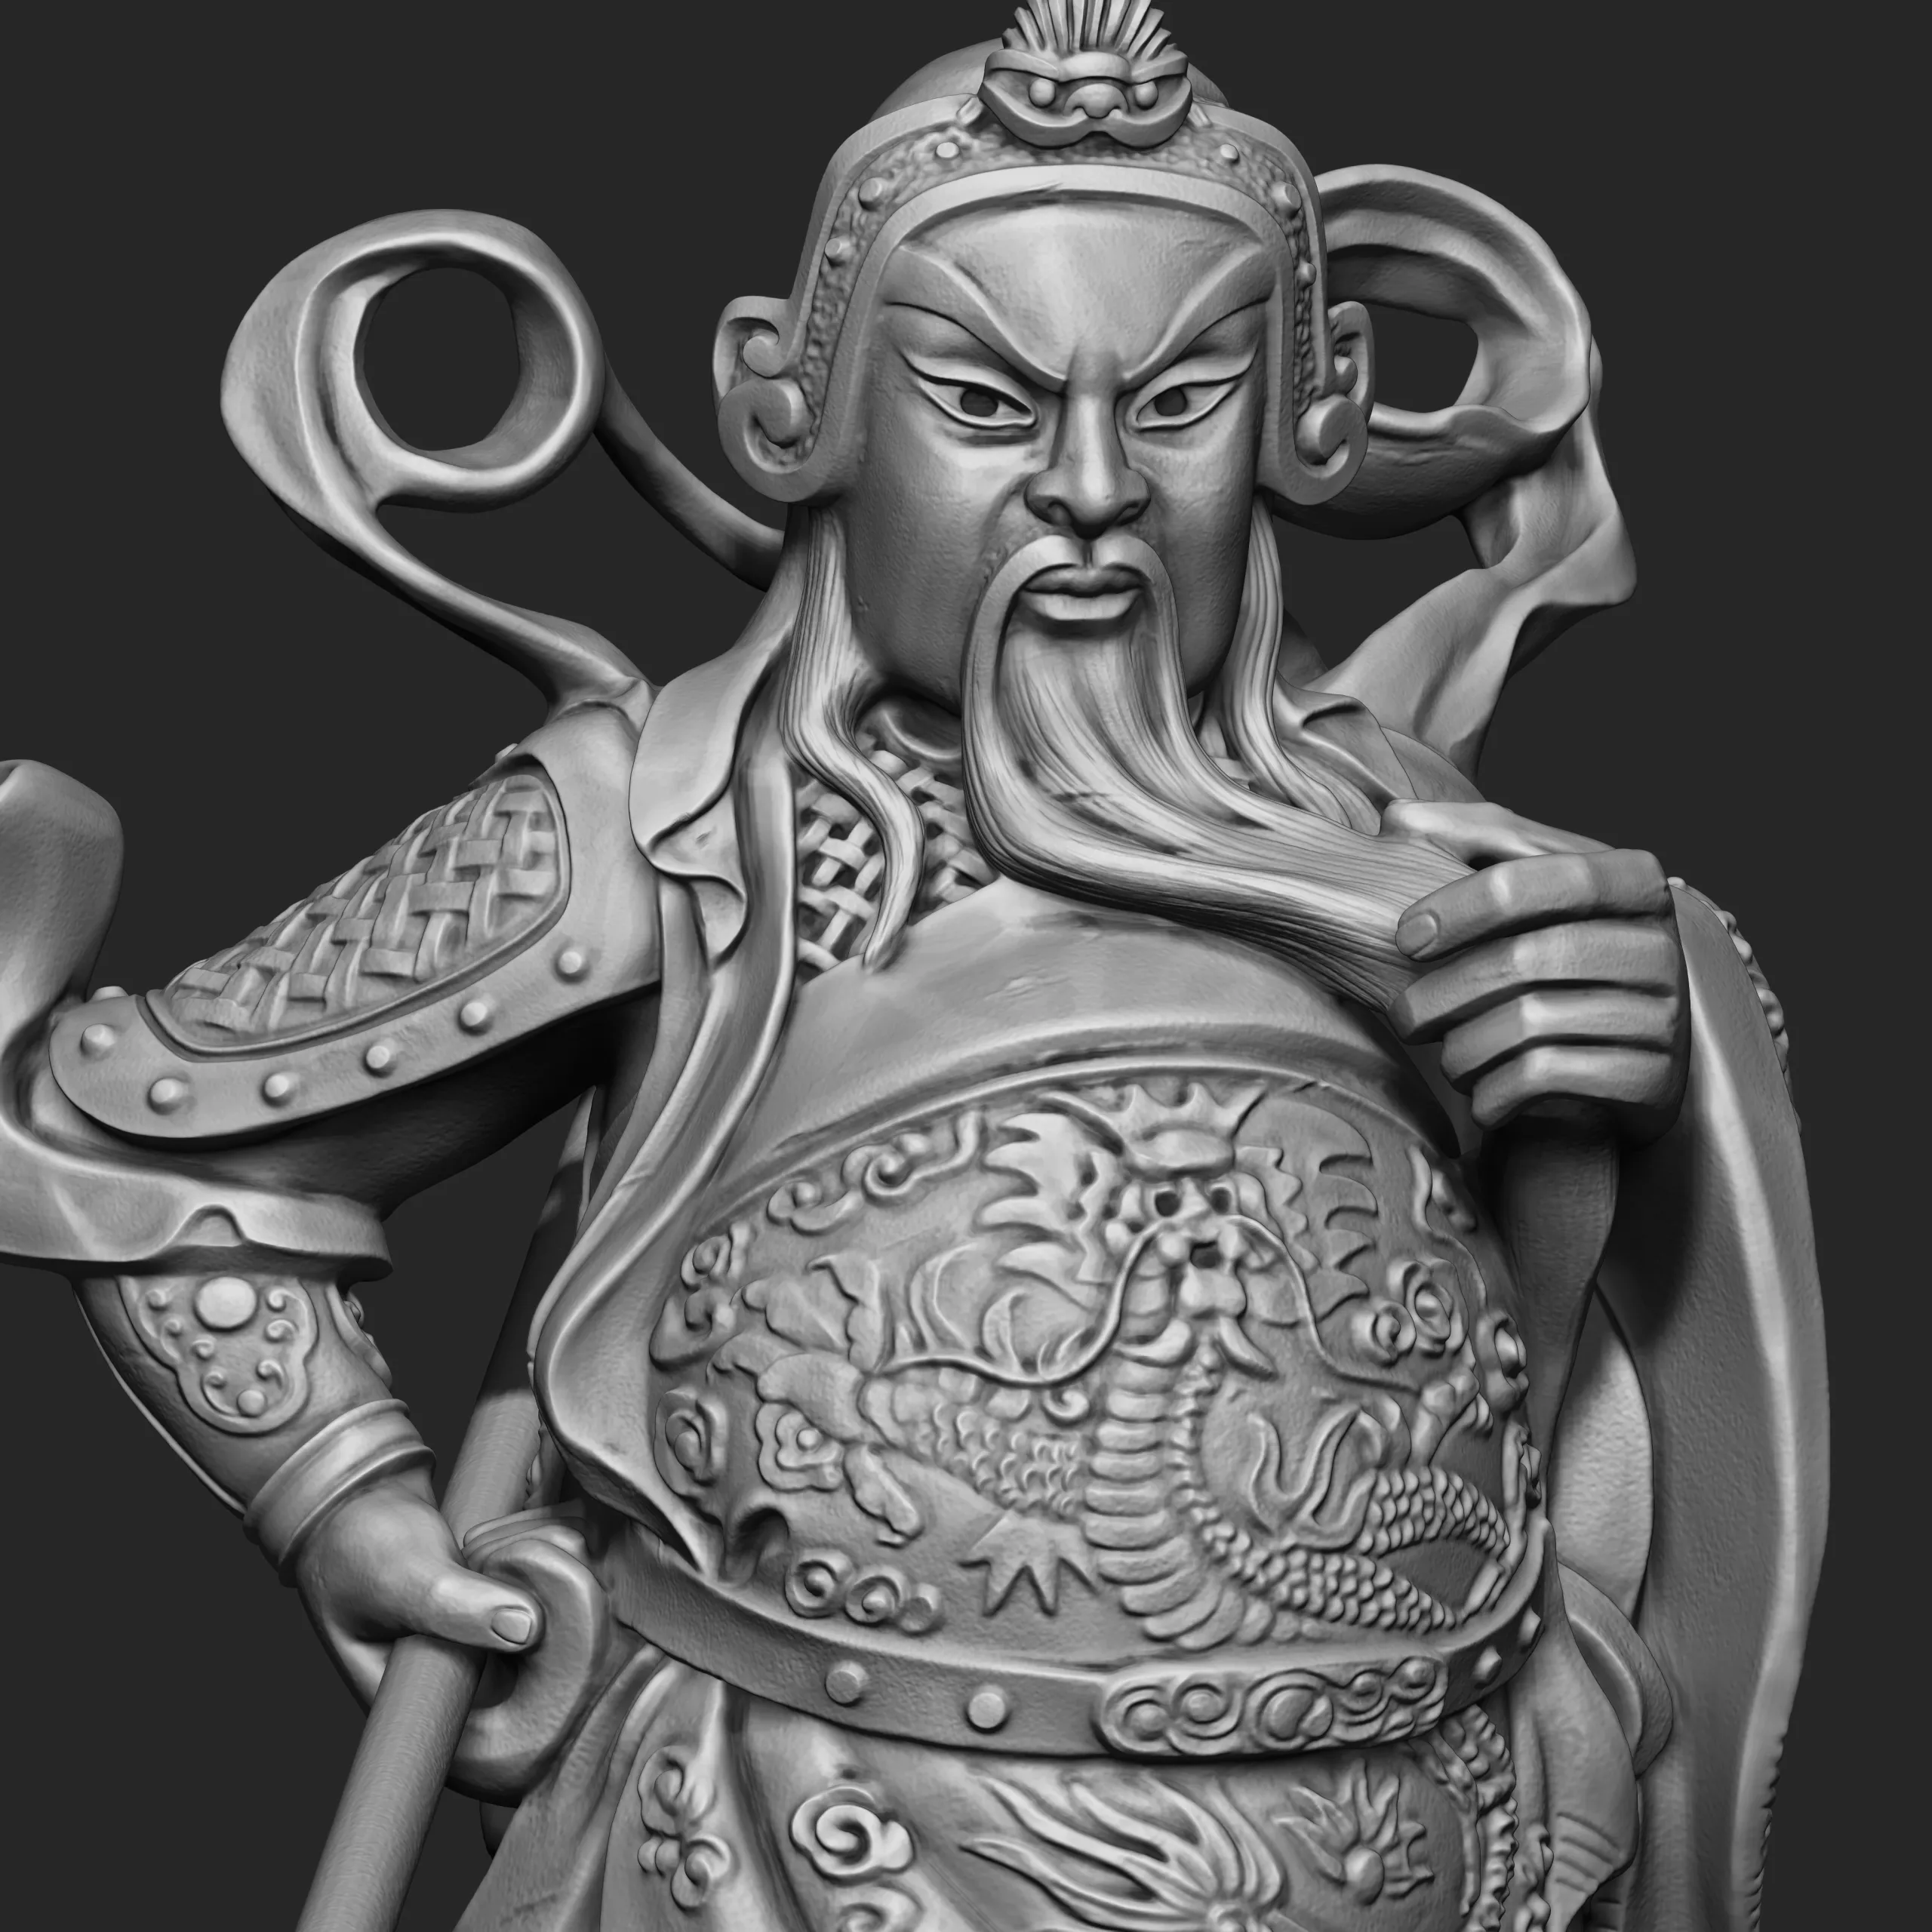 3 in One Character Sculpture Zbrush 2019 HighPoly